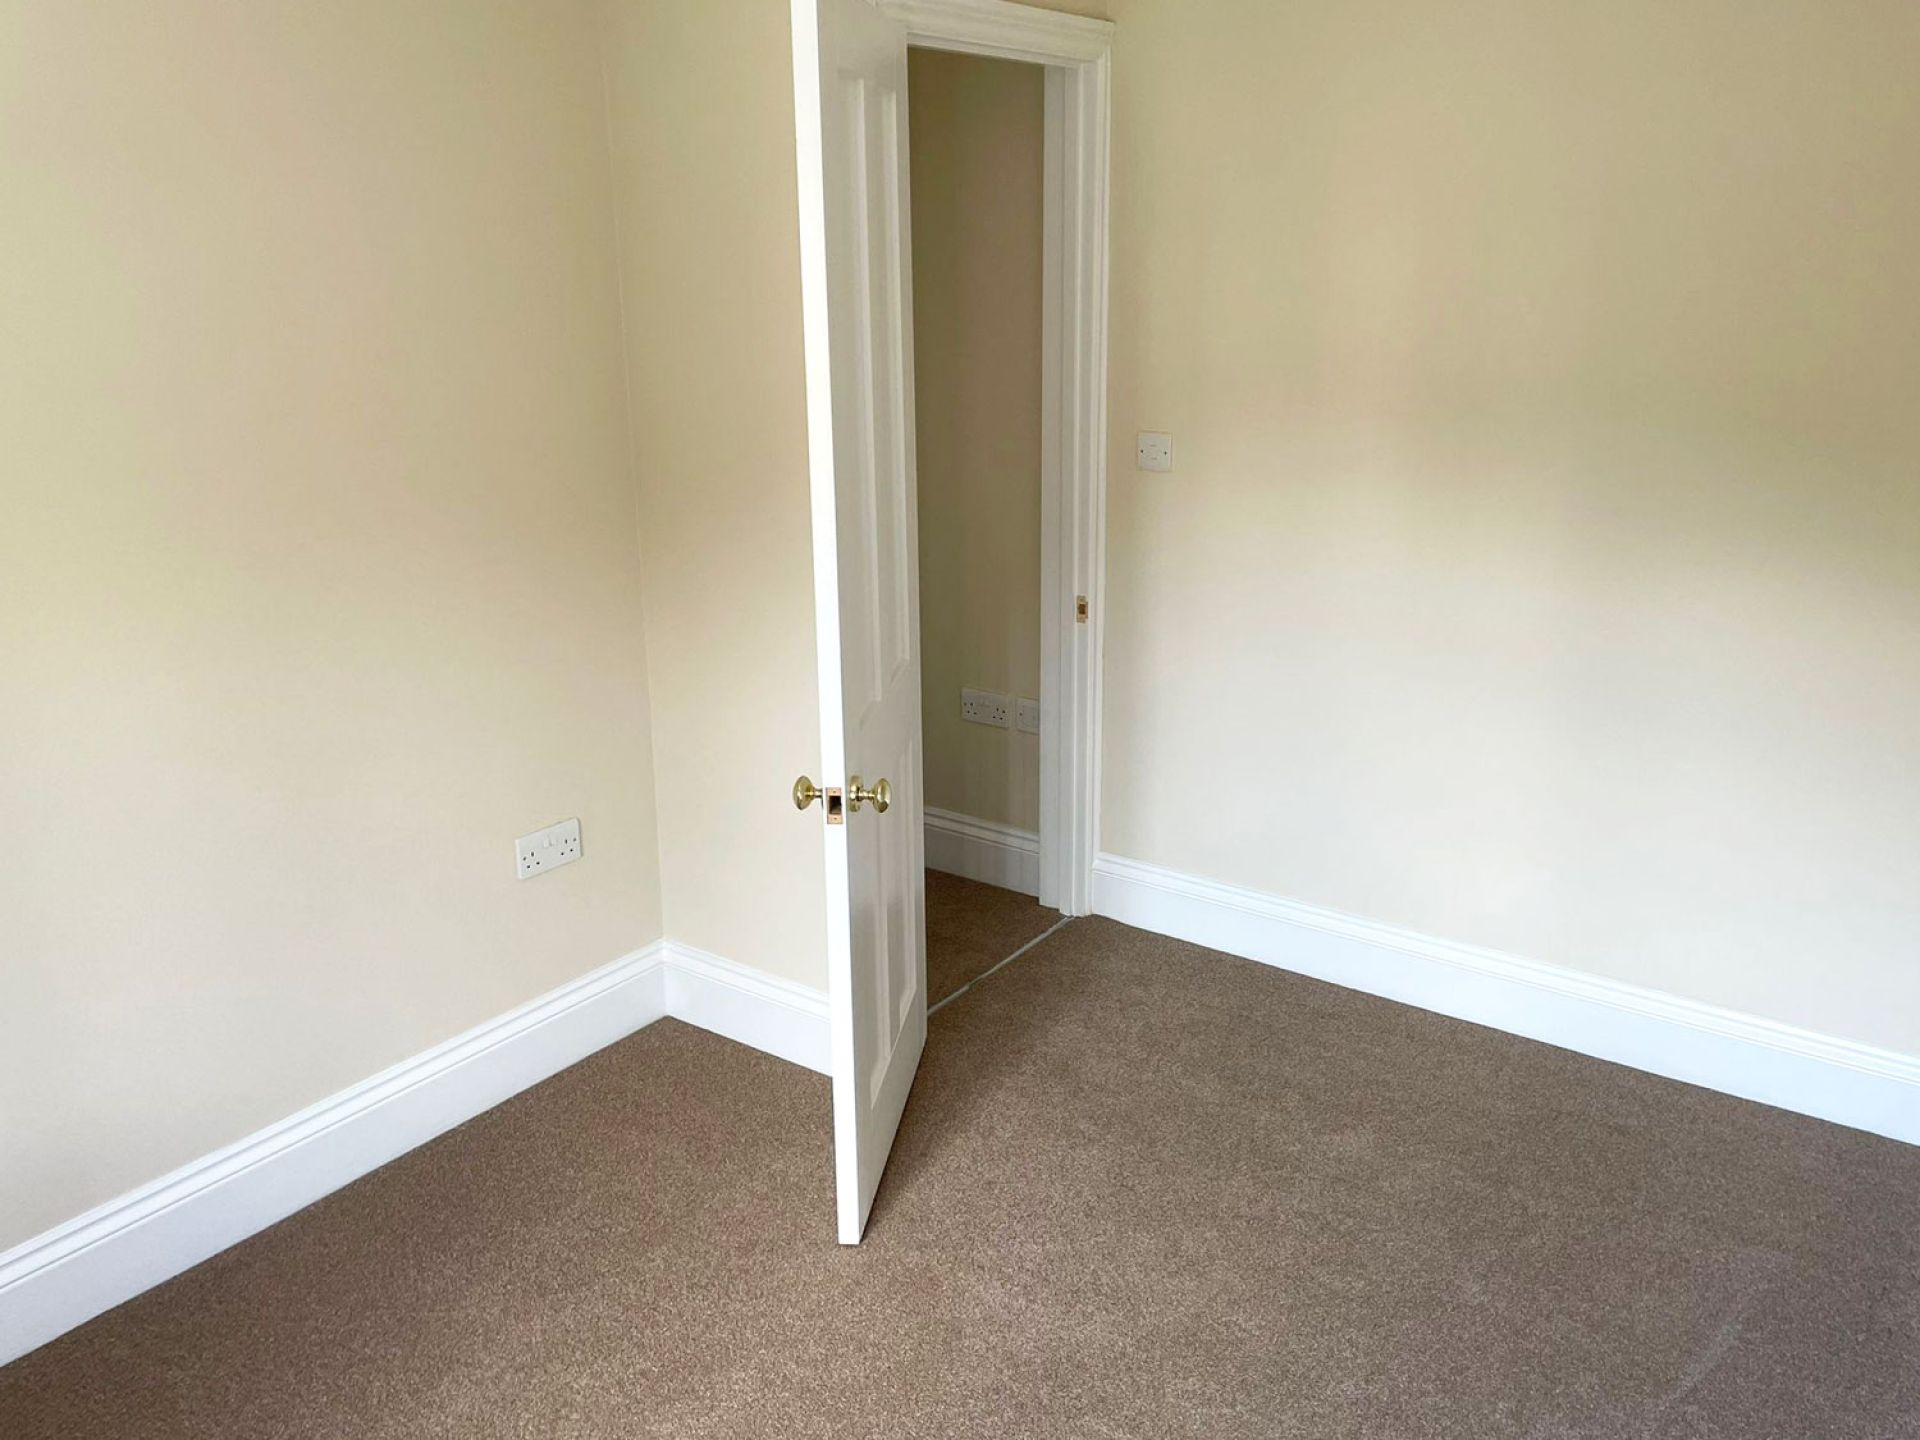 Cranborne house completed room with open door and brand new brown carpet fitted.